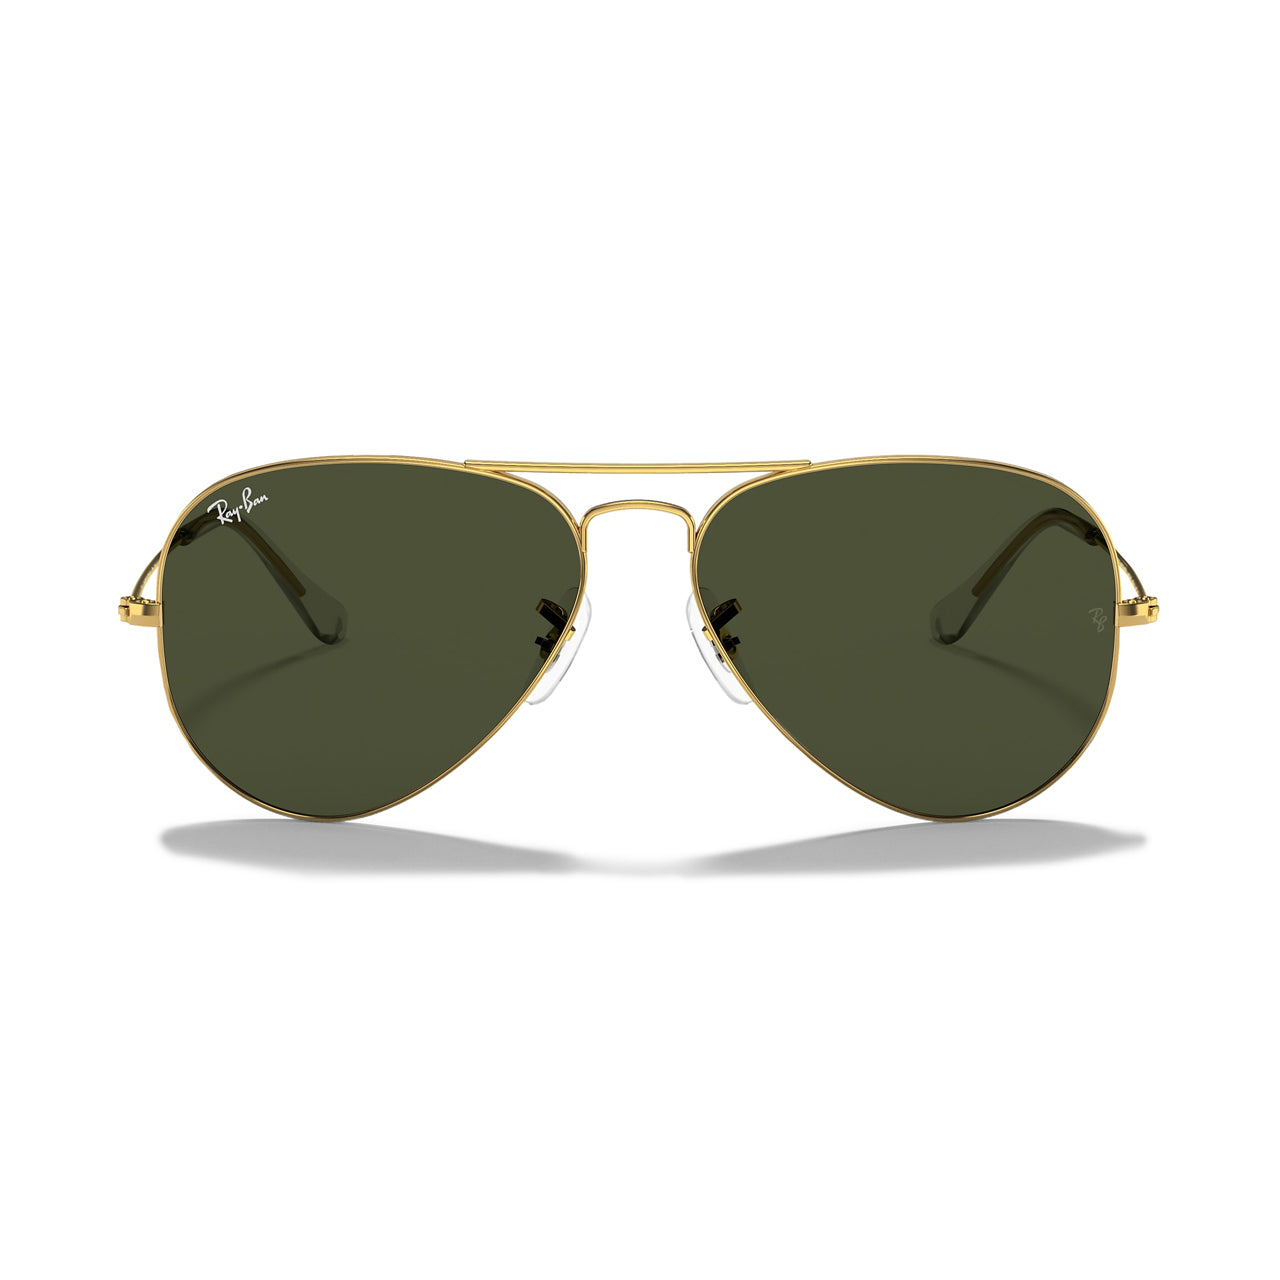 RAY-BAN sunglasses online shop - Free Delivery